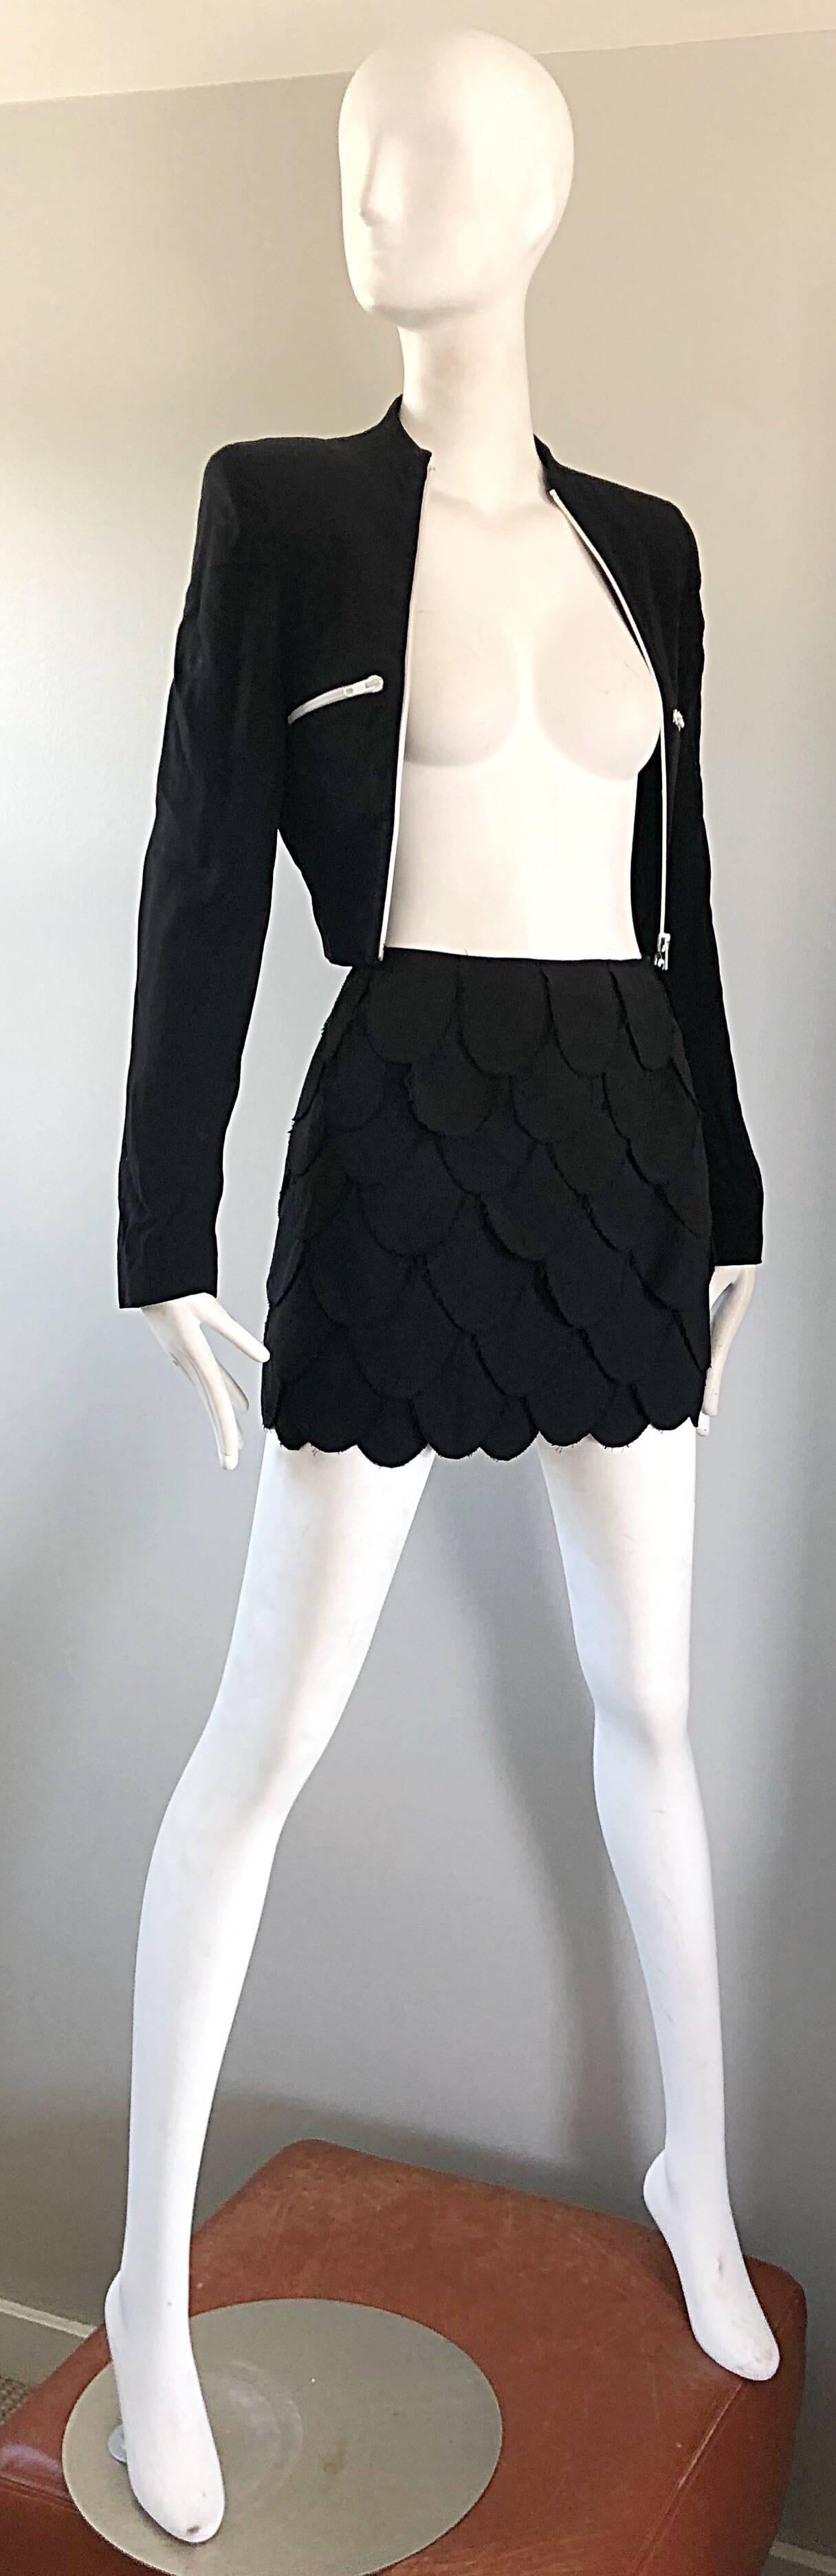 Moschino Cheap & Chic Vintage 90s Black Size 4 Carwash Fringe Mini Skirt For Sale 8